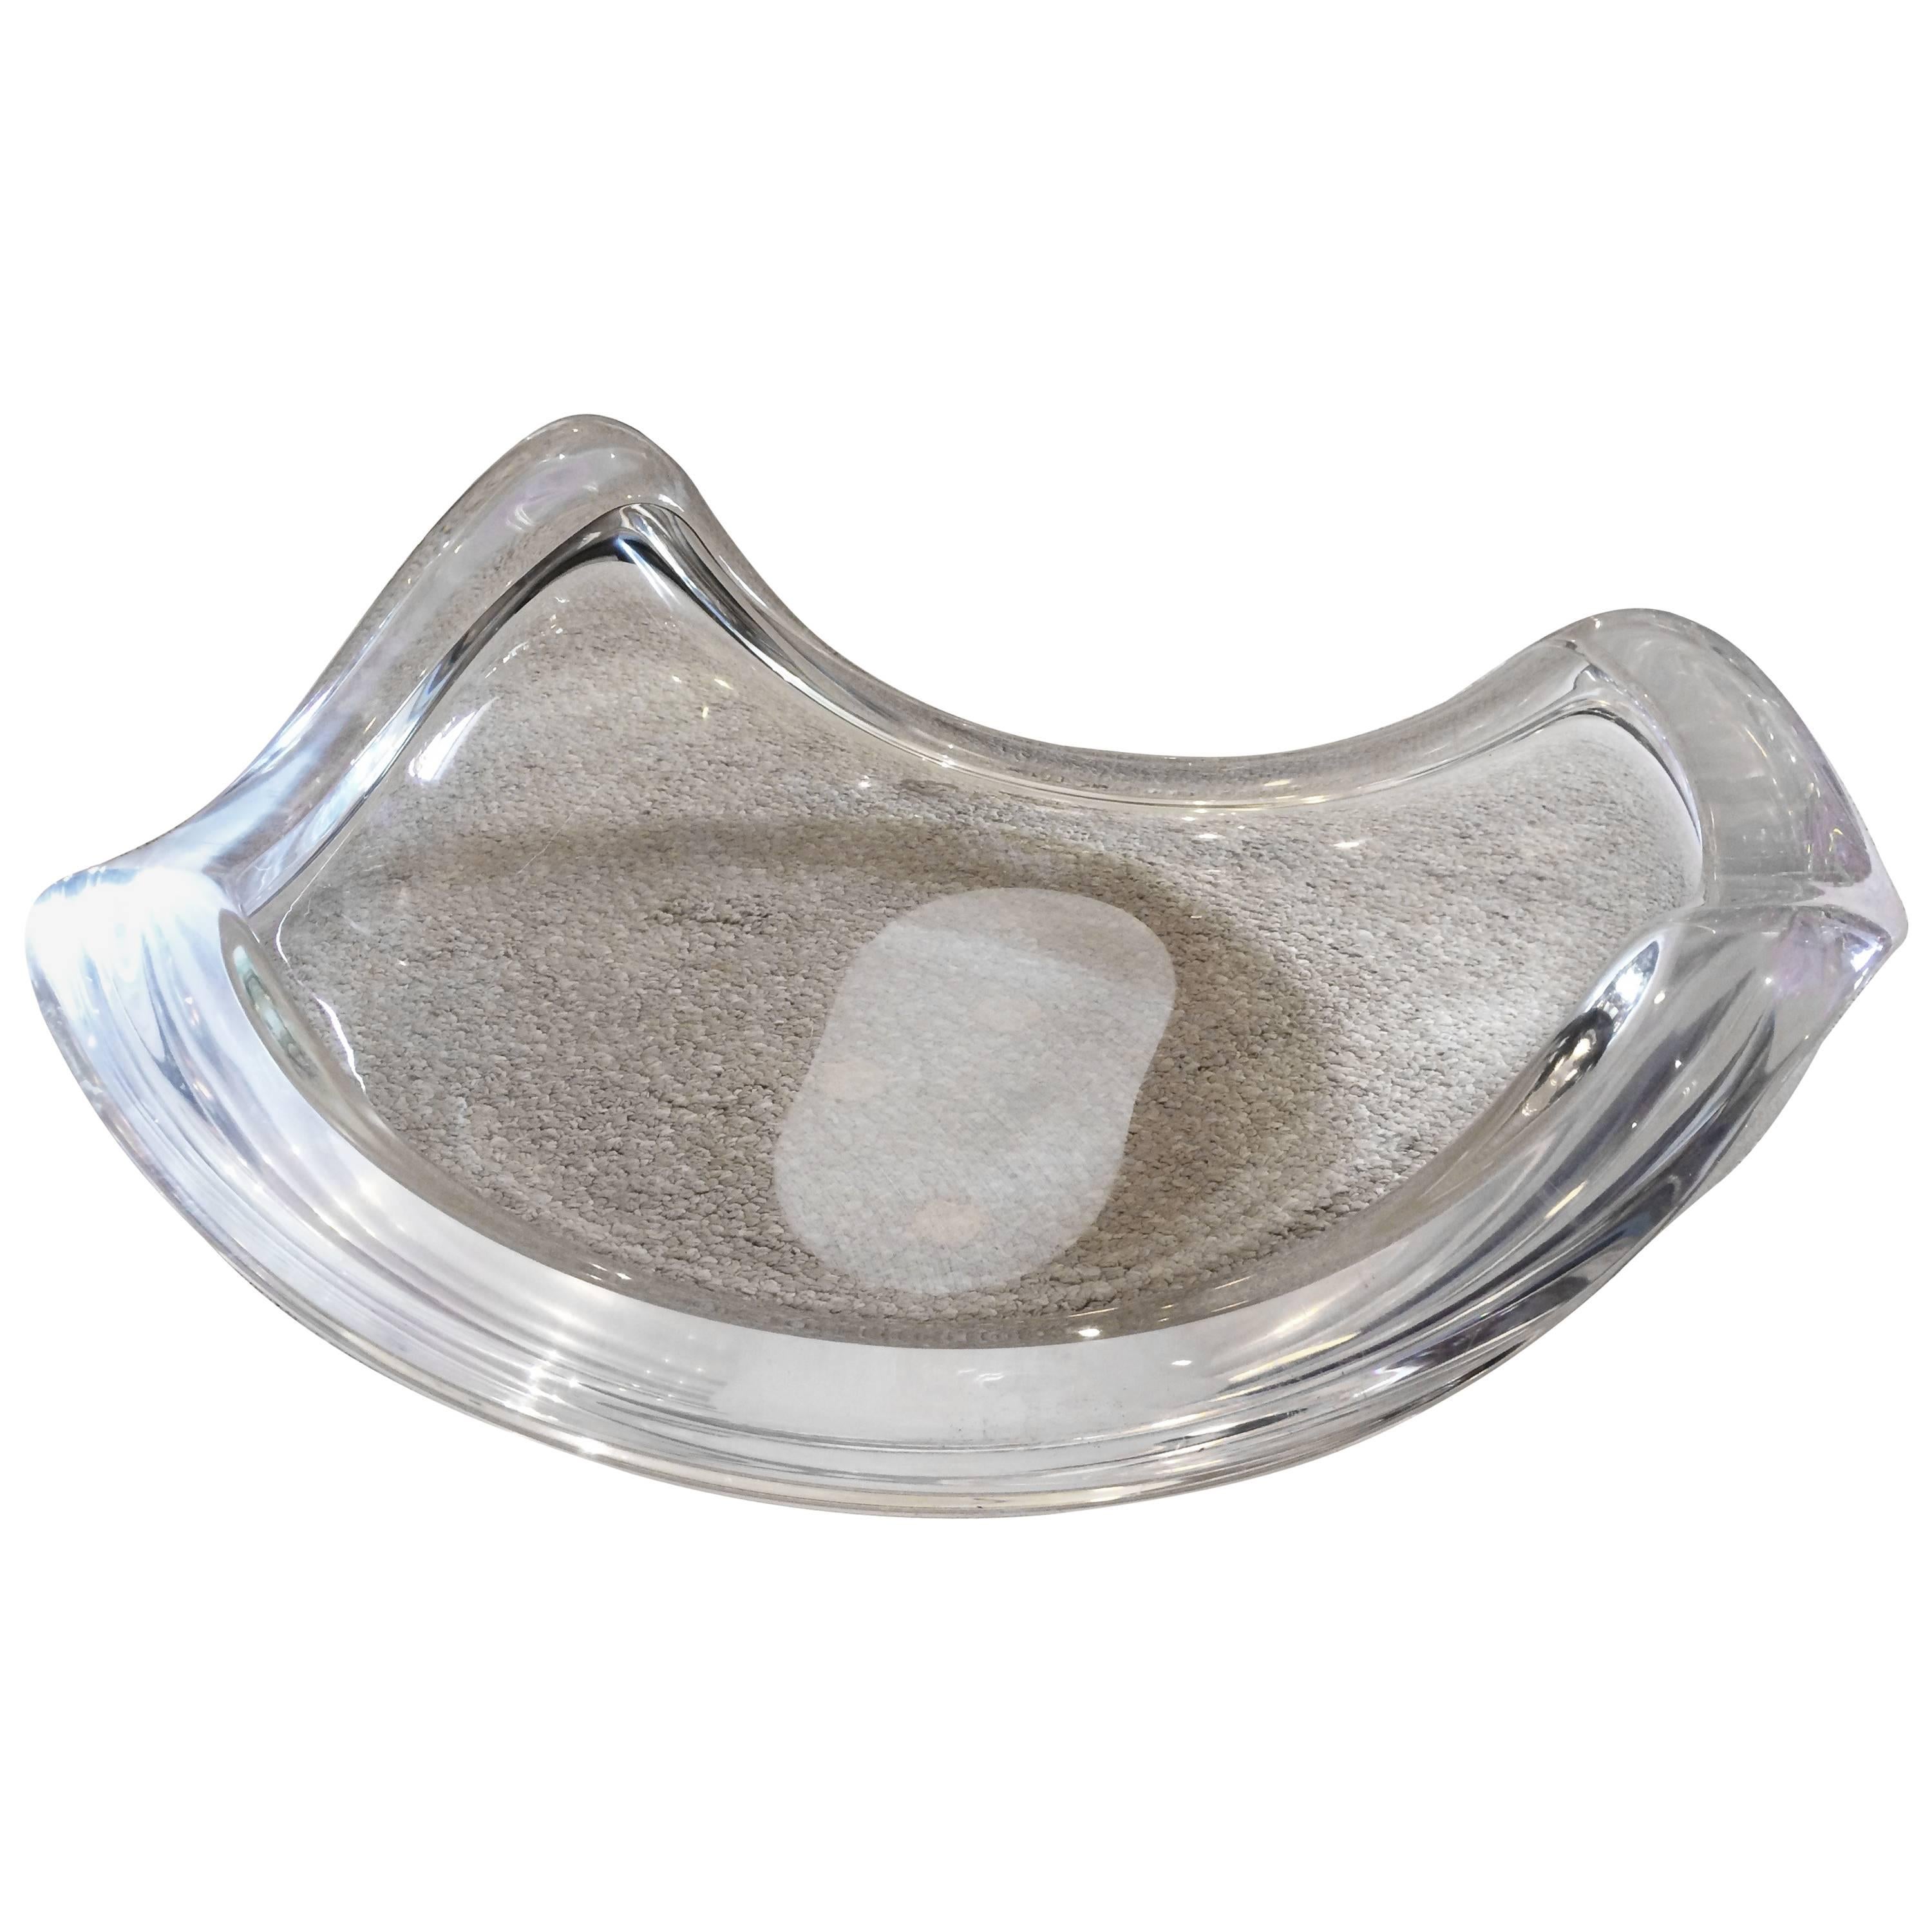 Super Cool Chunky Lucite Biomorphic Bowl